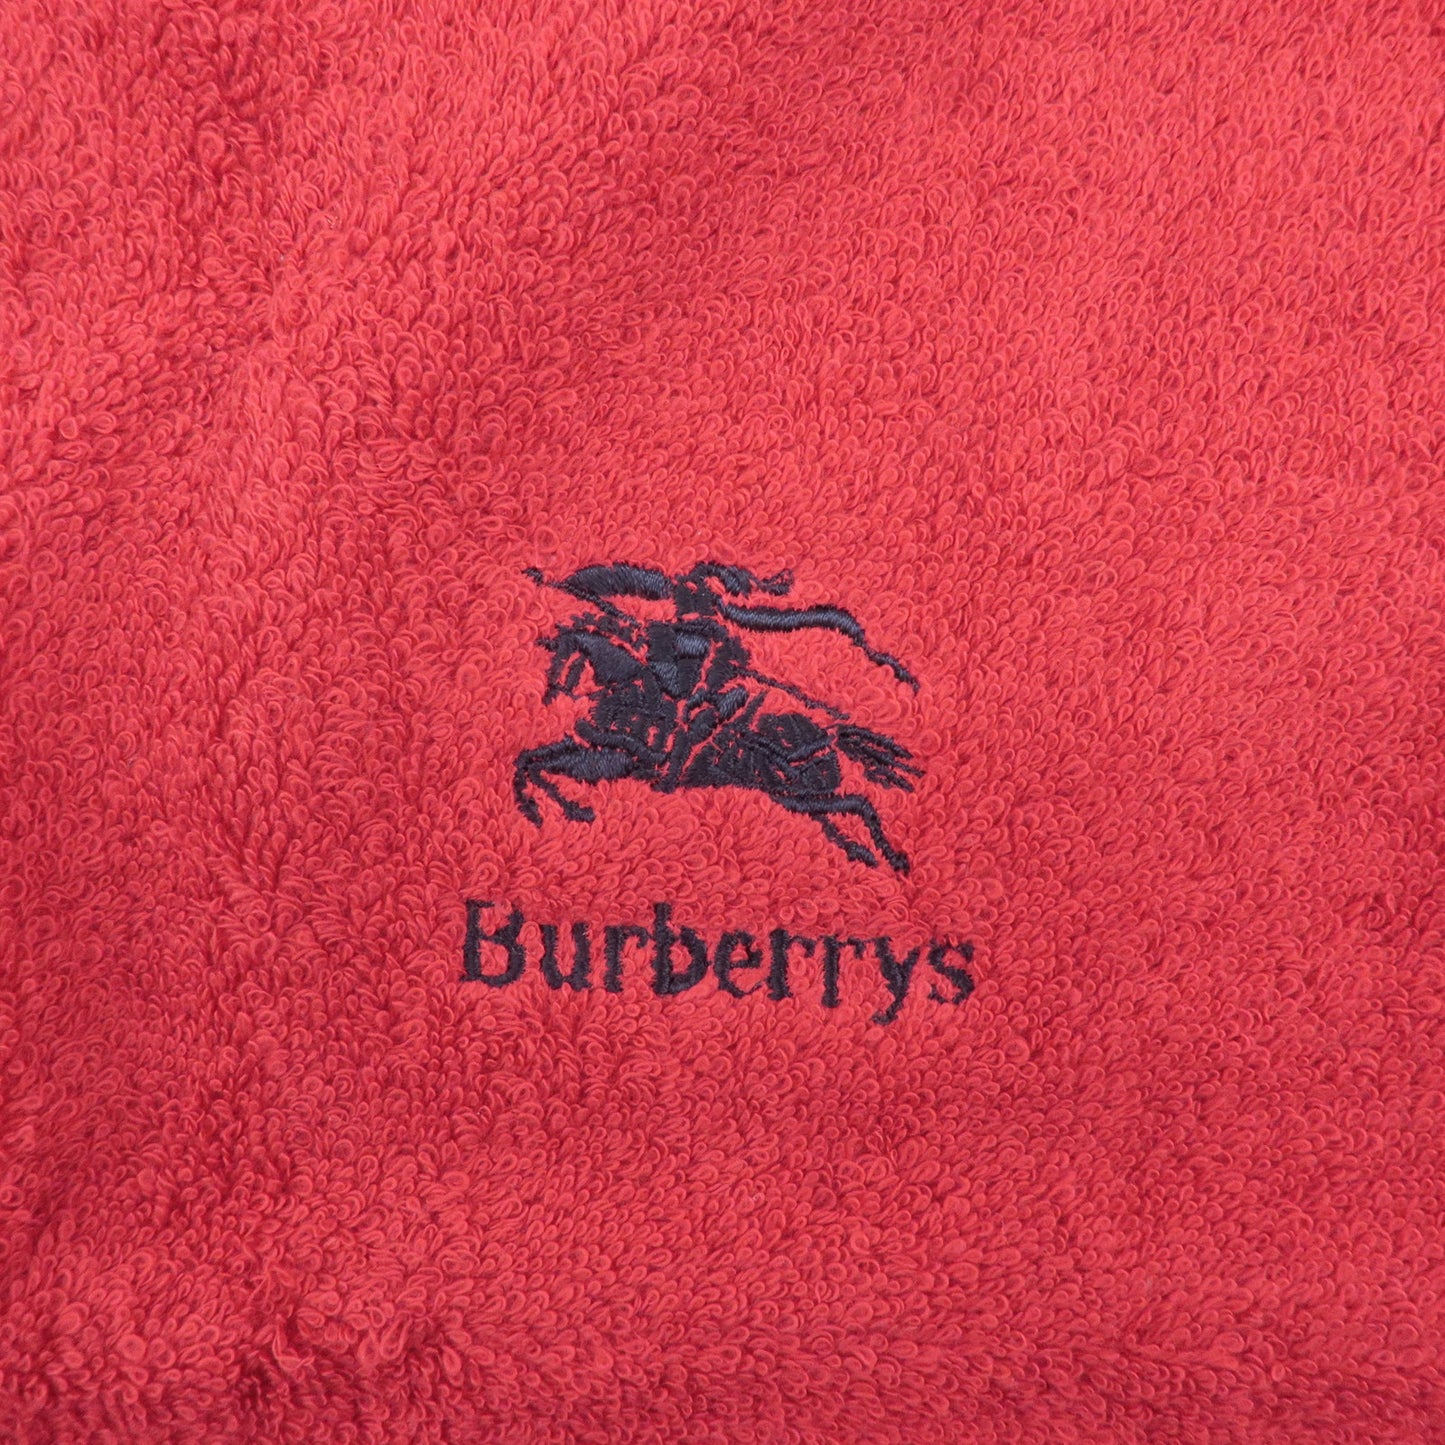 BURBERRY Towel Set Small Towel 100% Cotton Red Green